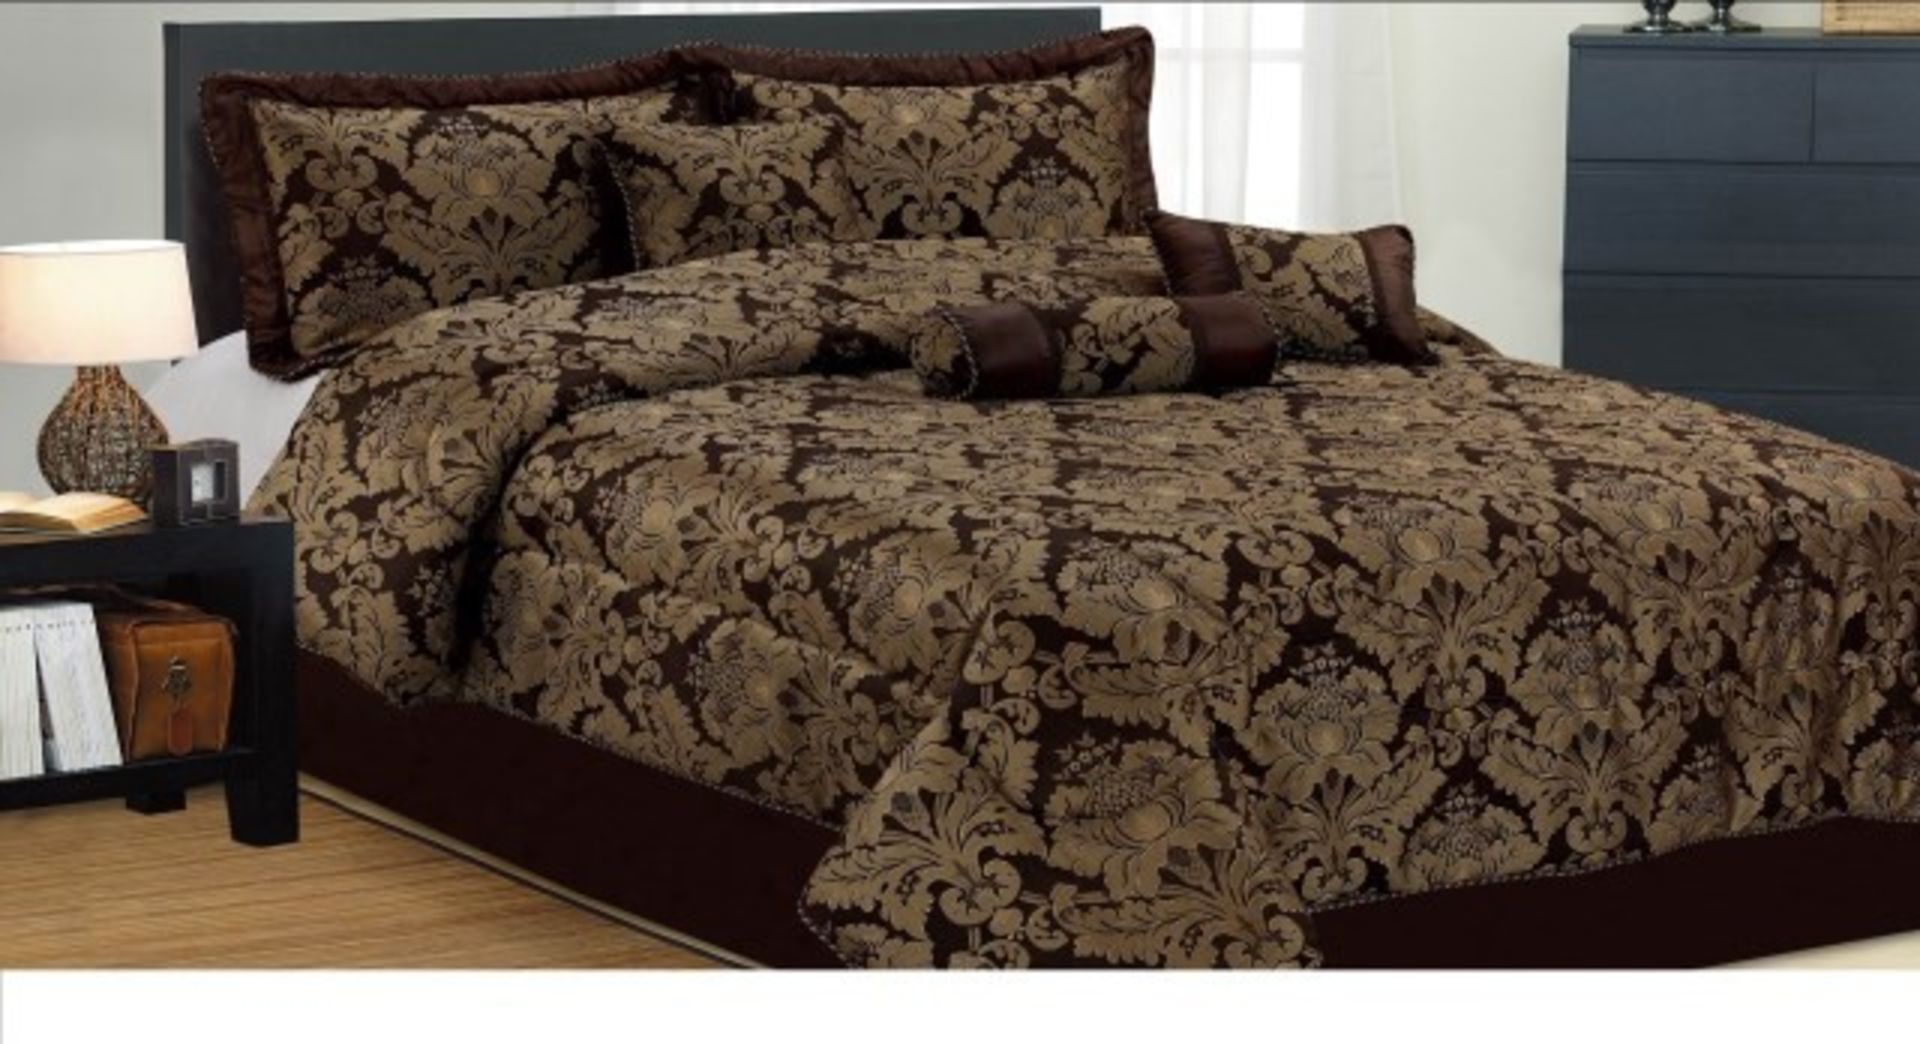 V Brand New Jacquard 7 pce King Size Bed Set RRP129.99 To Include Bed Spread Valance Sheet Pillow